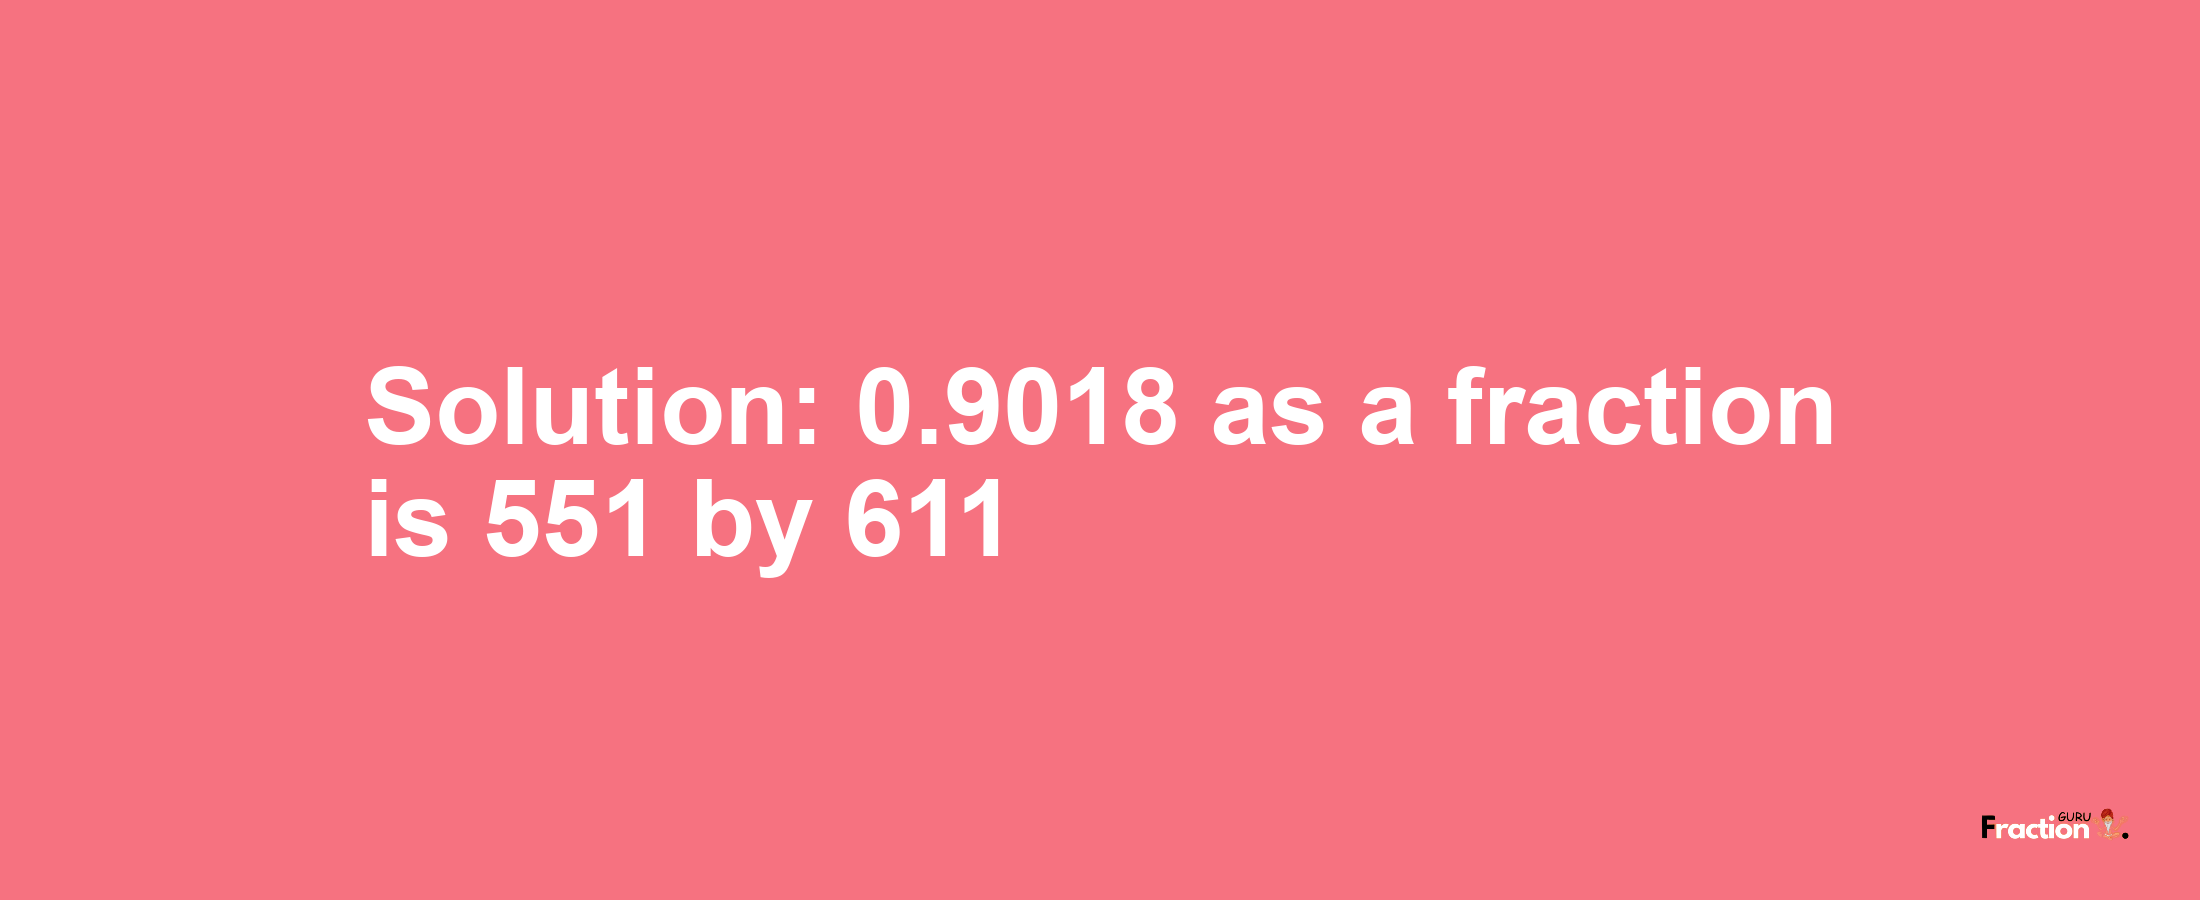 Solution:0.9018 as a fraction is 551/611